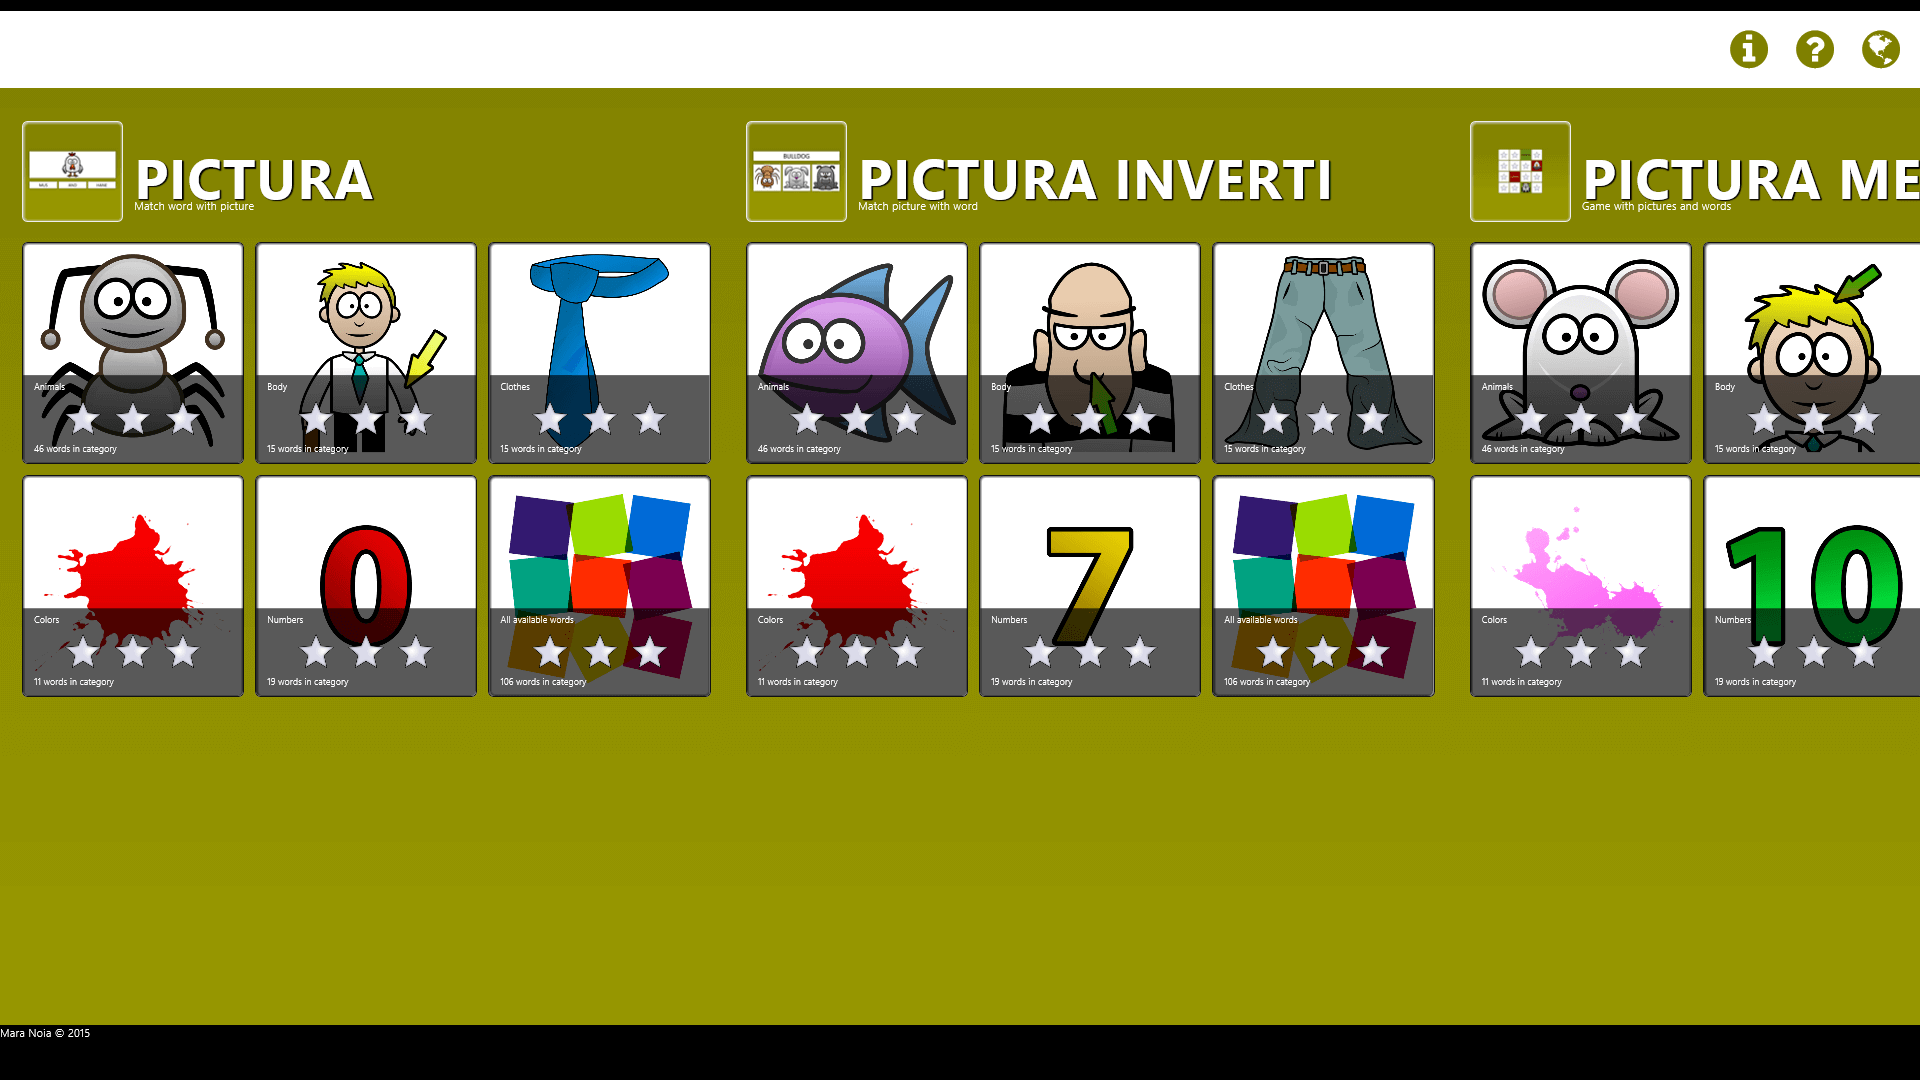 Choose between the four games "Pictura", "Pictura Inverti", "Pictura Memory" and "Pictura Spelling". In each of the four games, you can choose between the categories animals, body, clothing, colors, numbers or a mixture of the five .